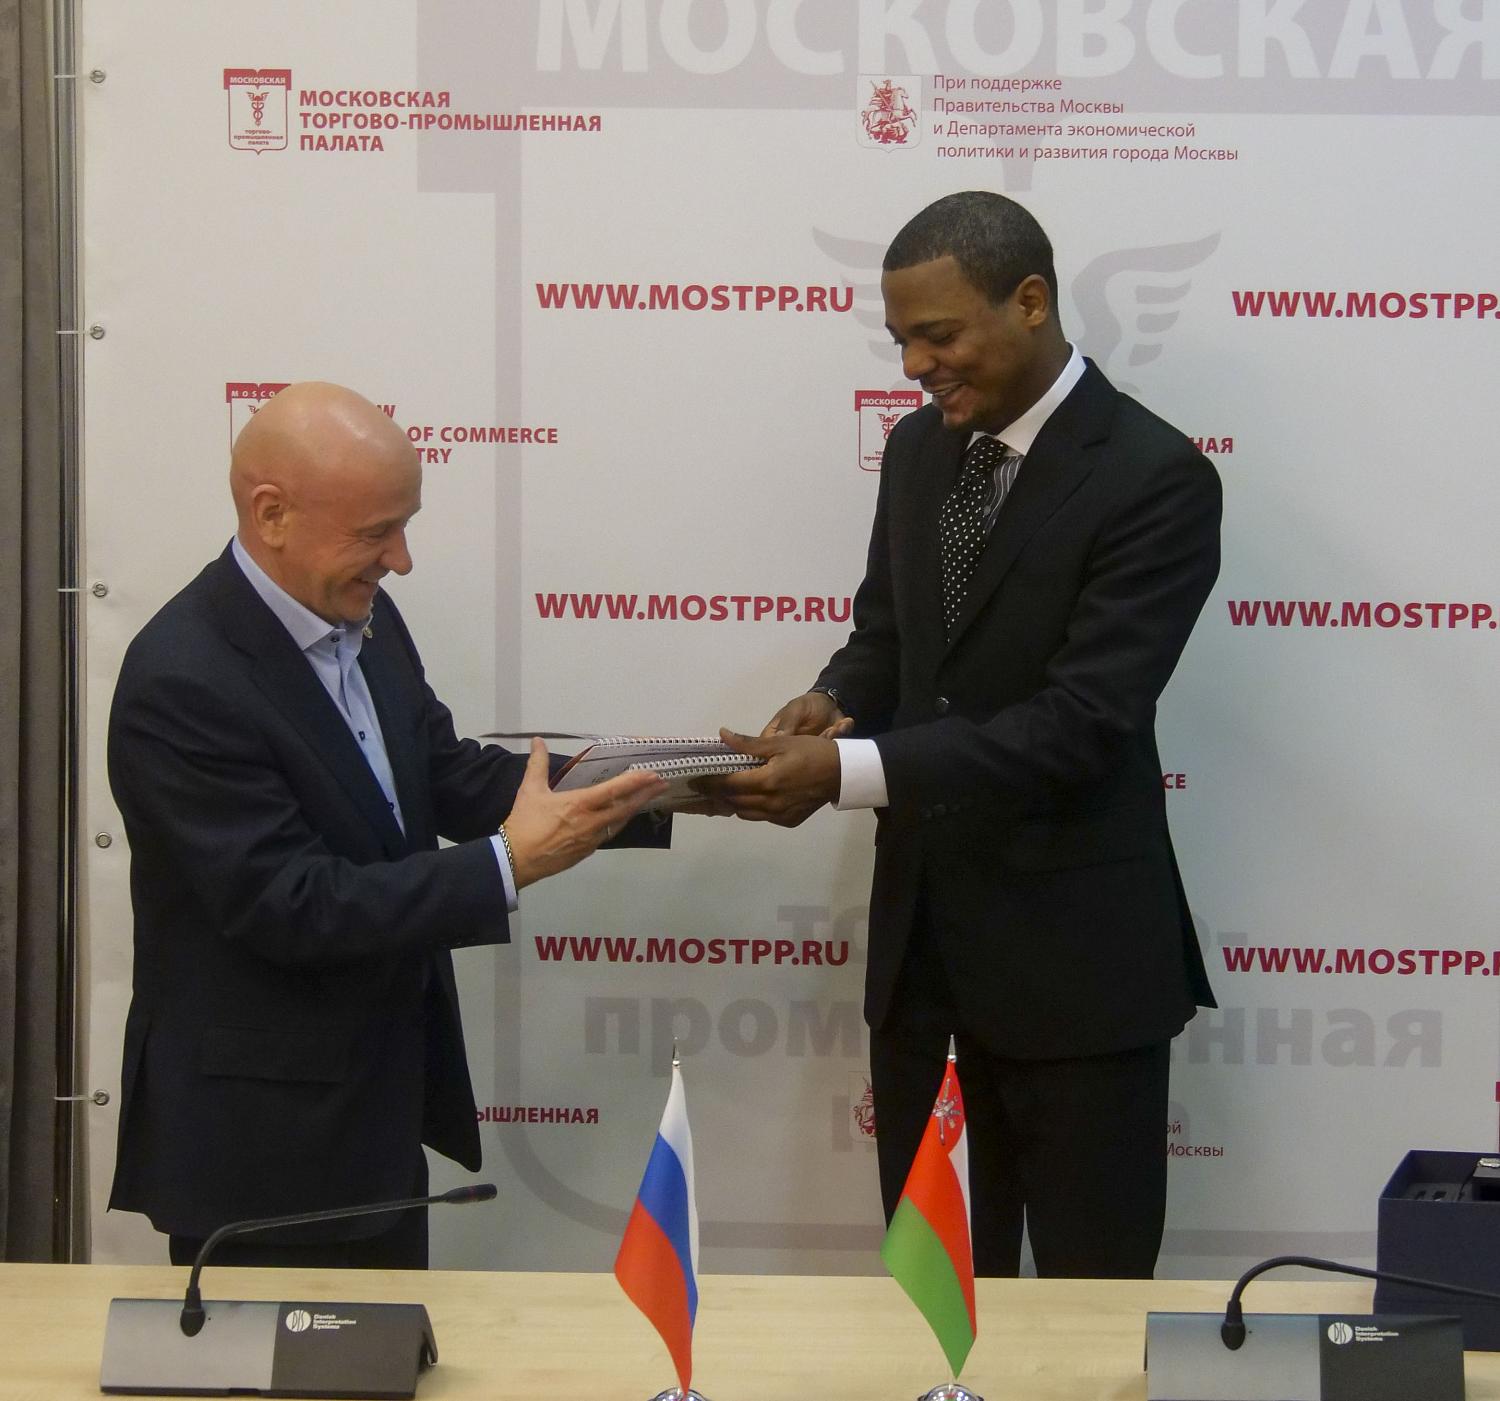 The Ambassador Extraordinary and Plenipotentiary of the Sultanate of Oman visited the CCI of Moscow.